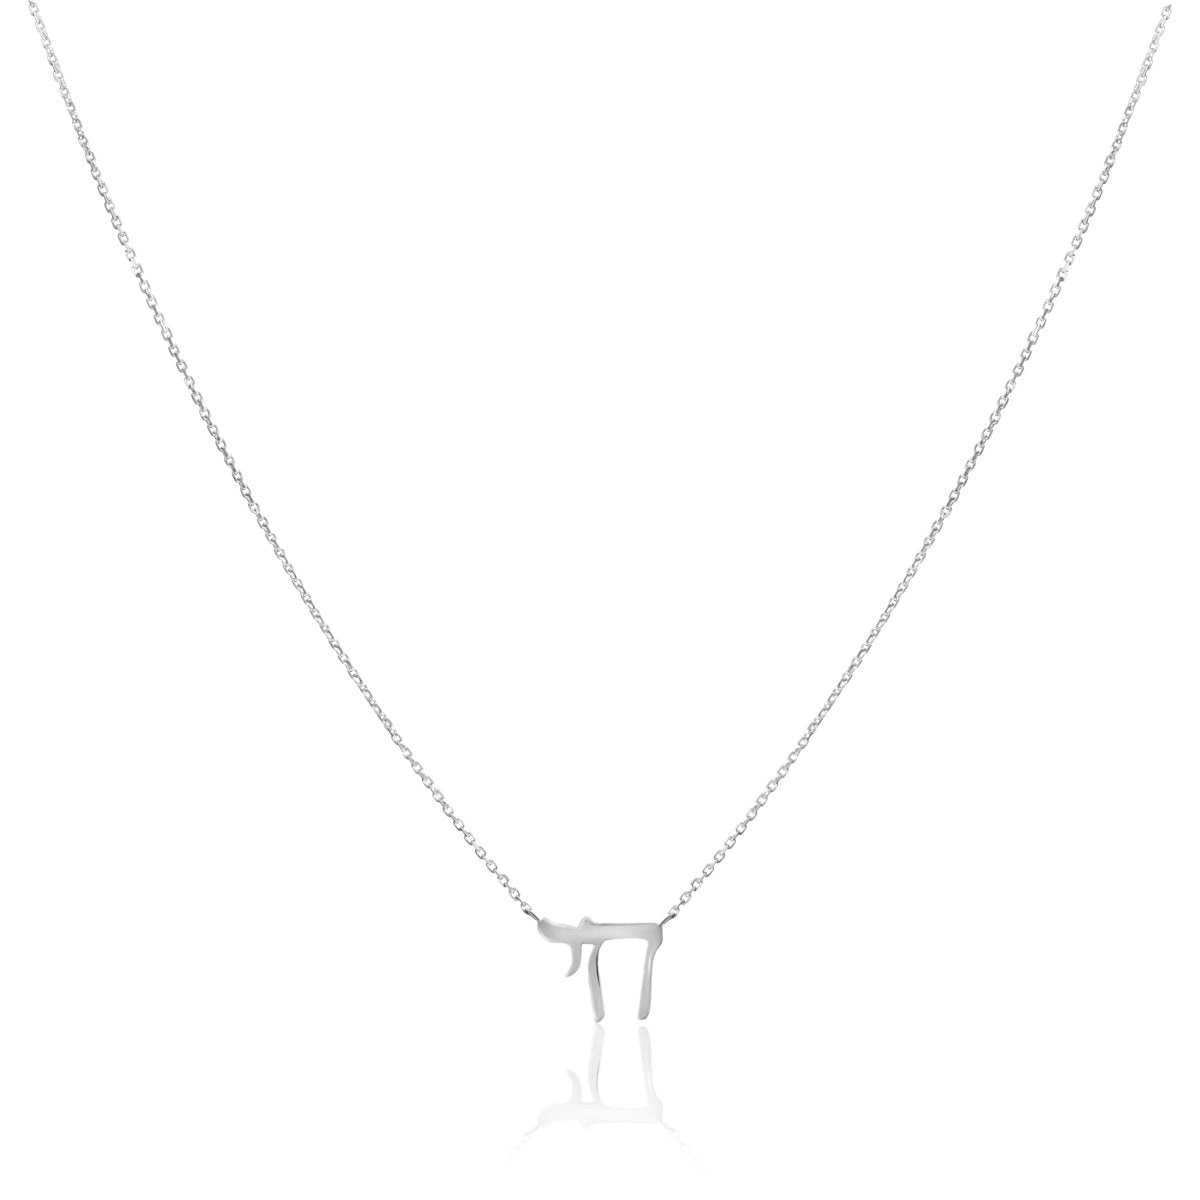 Am Israel Chai Hebrew Necklace in 14k Gold